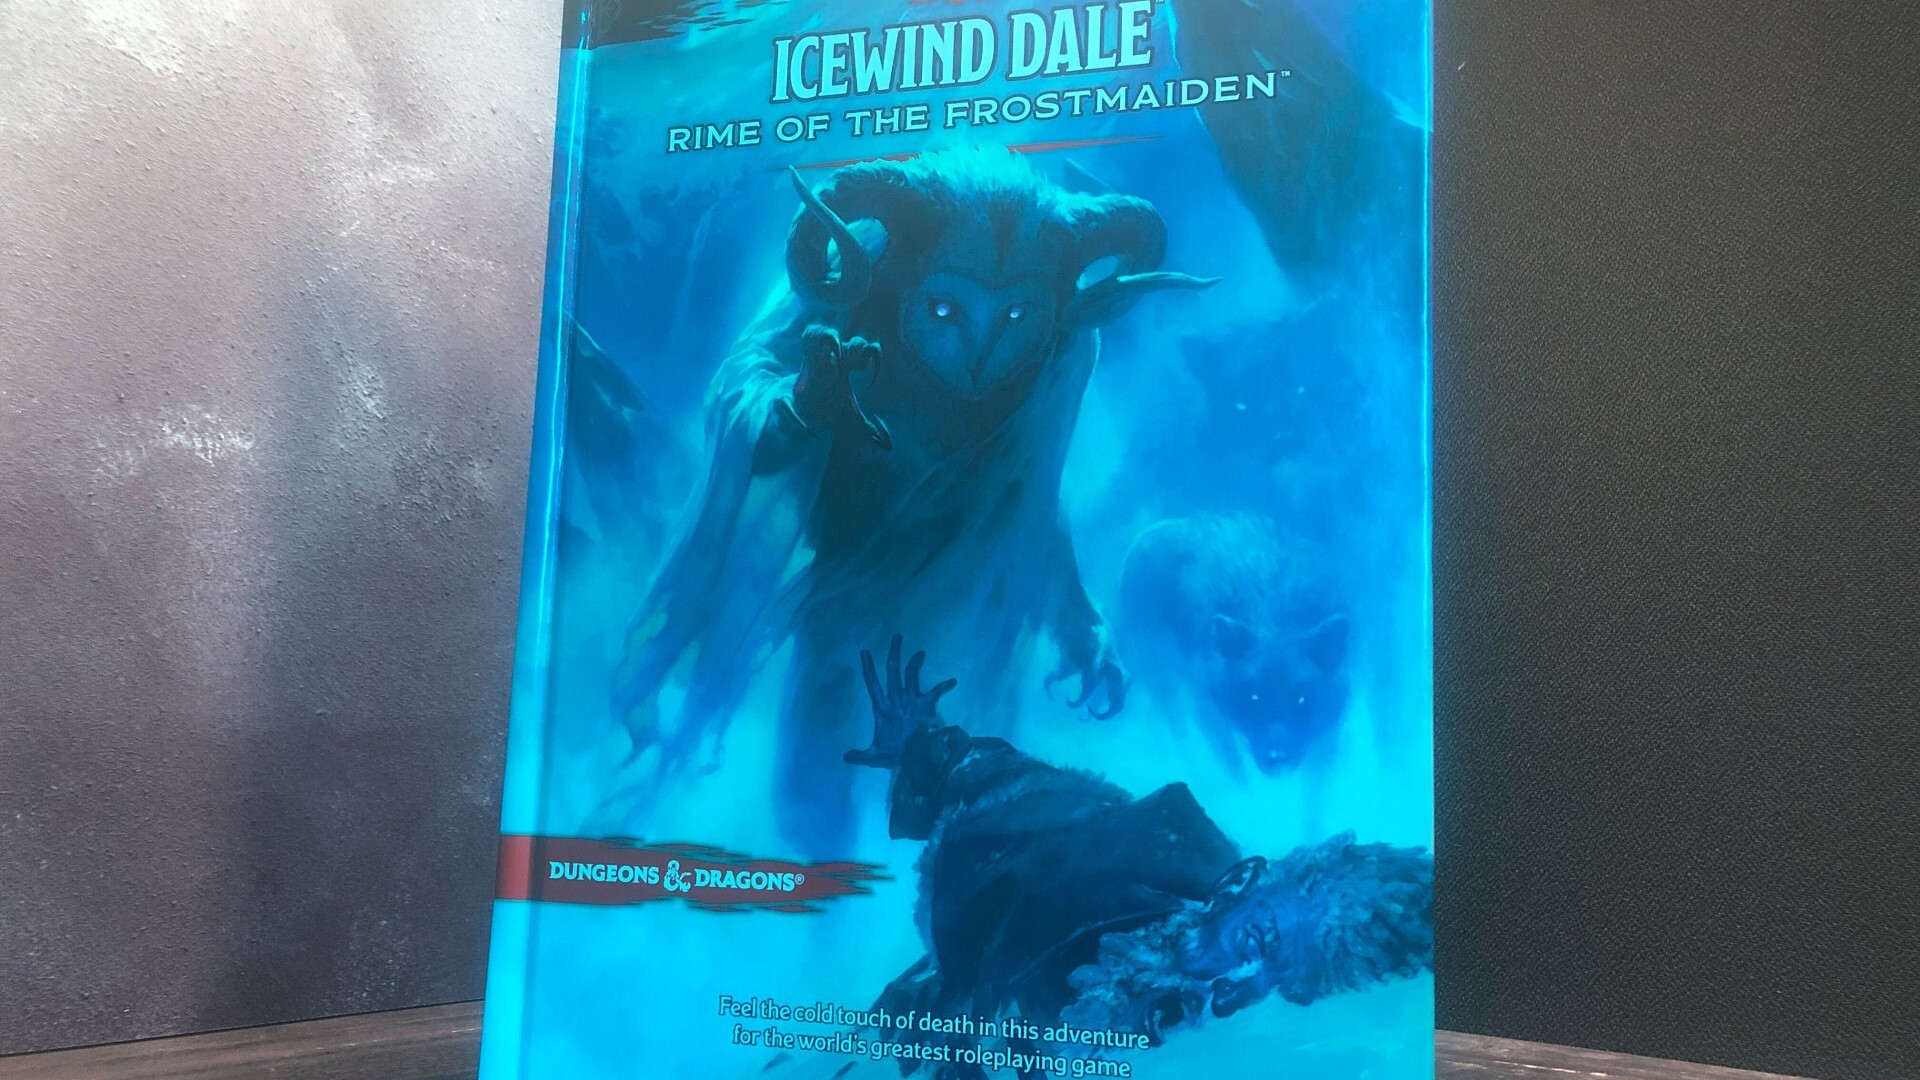 Icewind Dale: Rime of the Frostmaiden (D&D Adventure Book) (Dungeons &  Dragons)